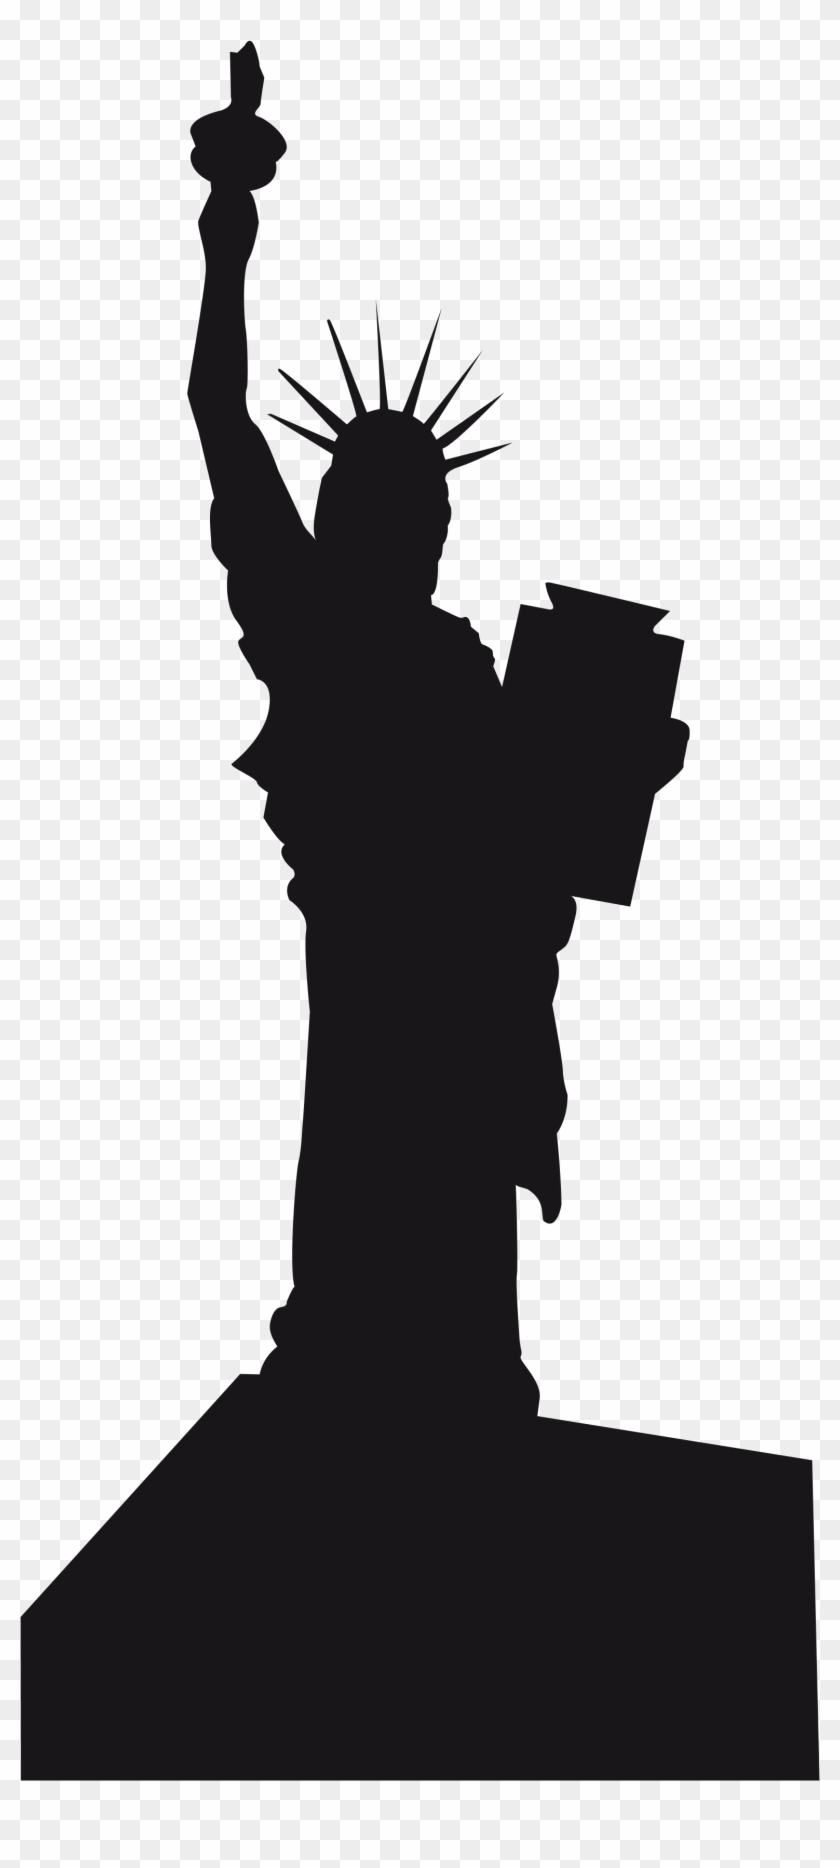 Open - Statue Of Liberty Silhouette Svg Clipart